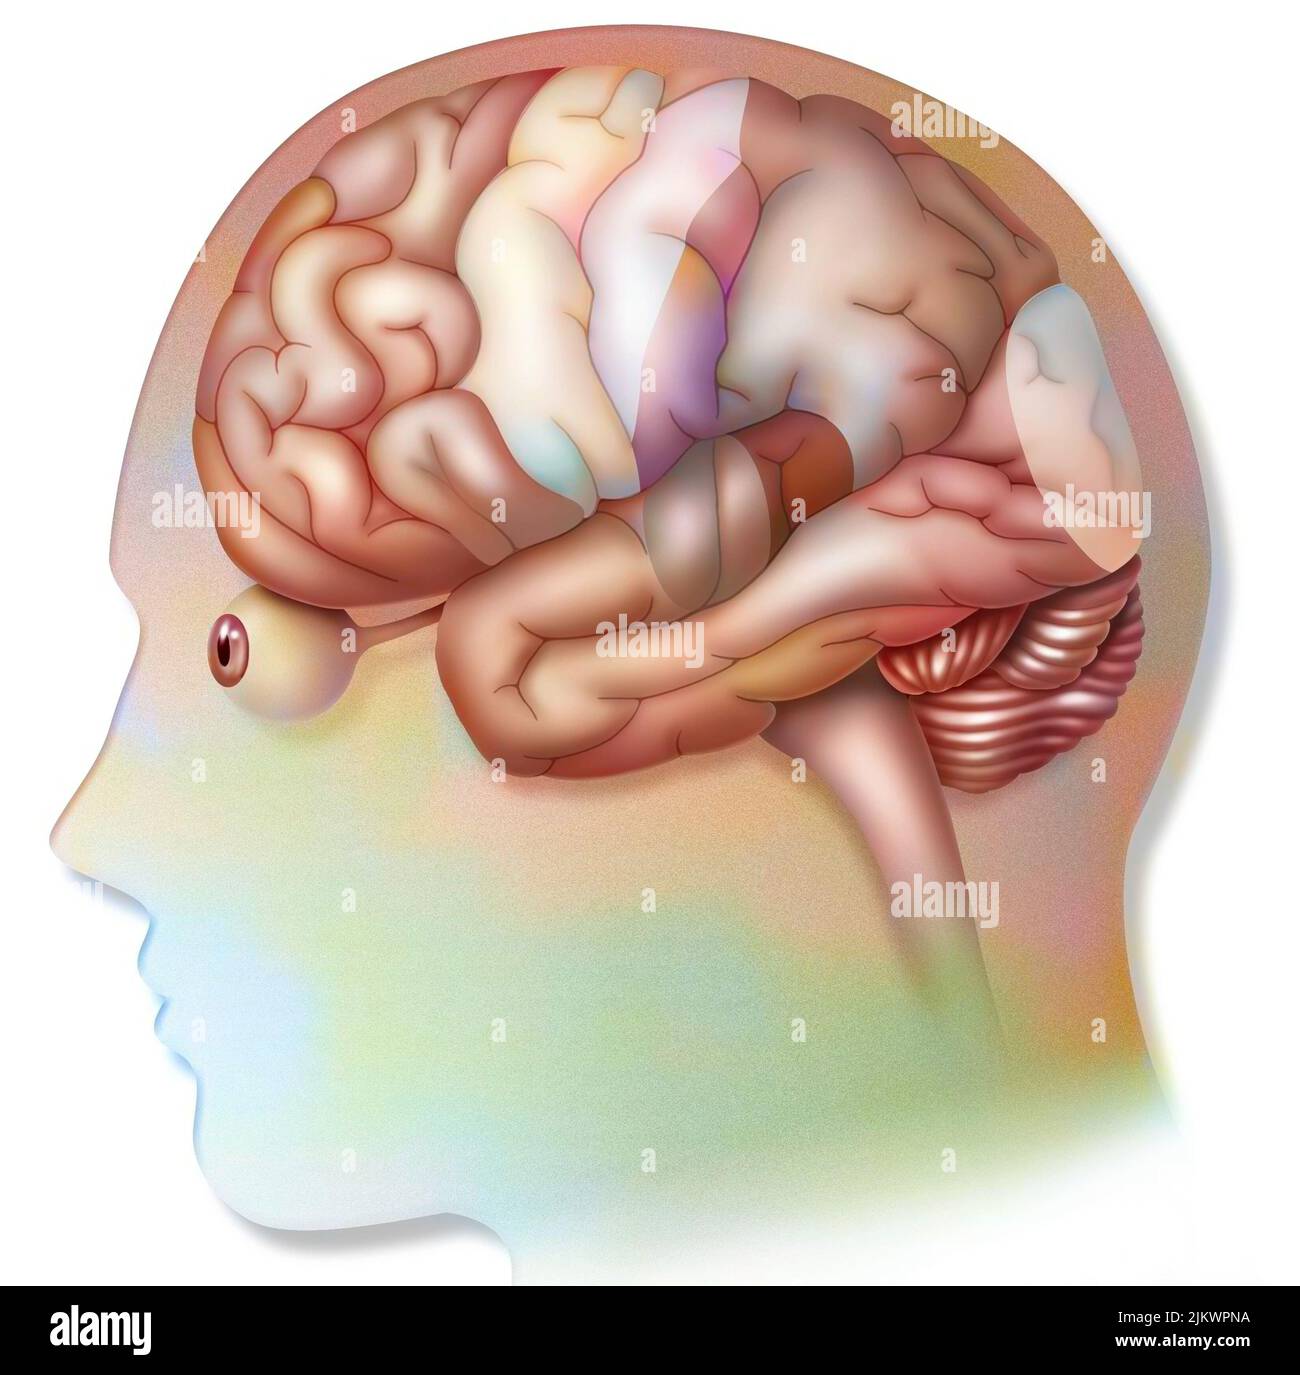 Human brain with areas (language, hearing, vision) and cortices (motor, sensory). Stock Photo